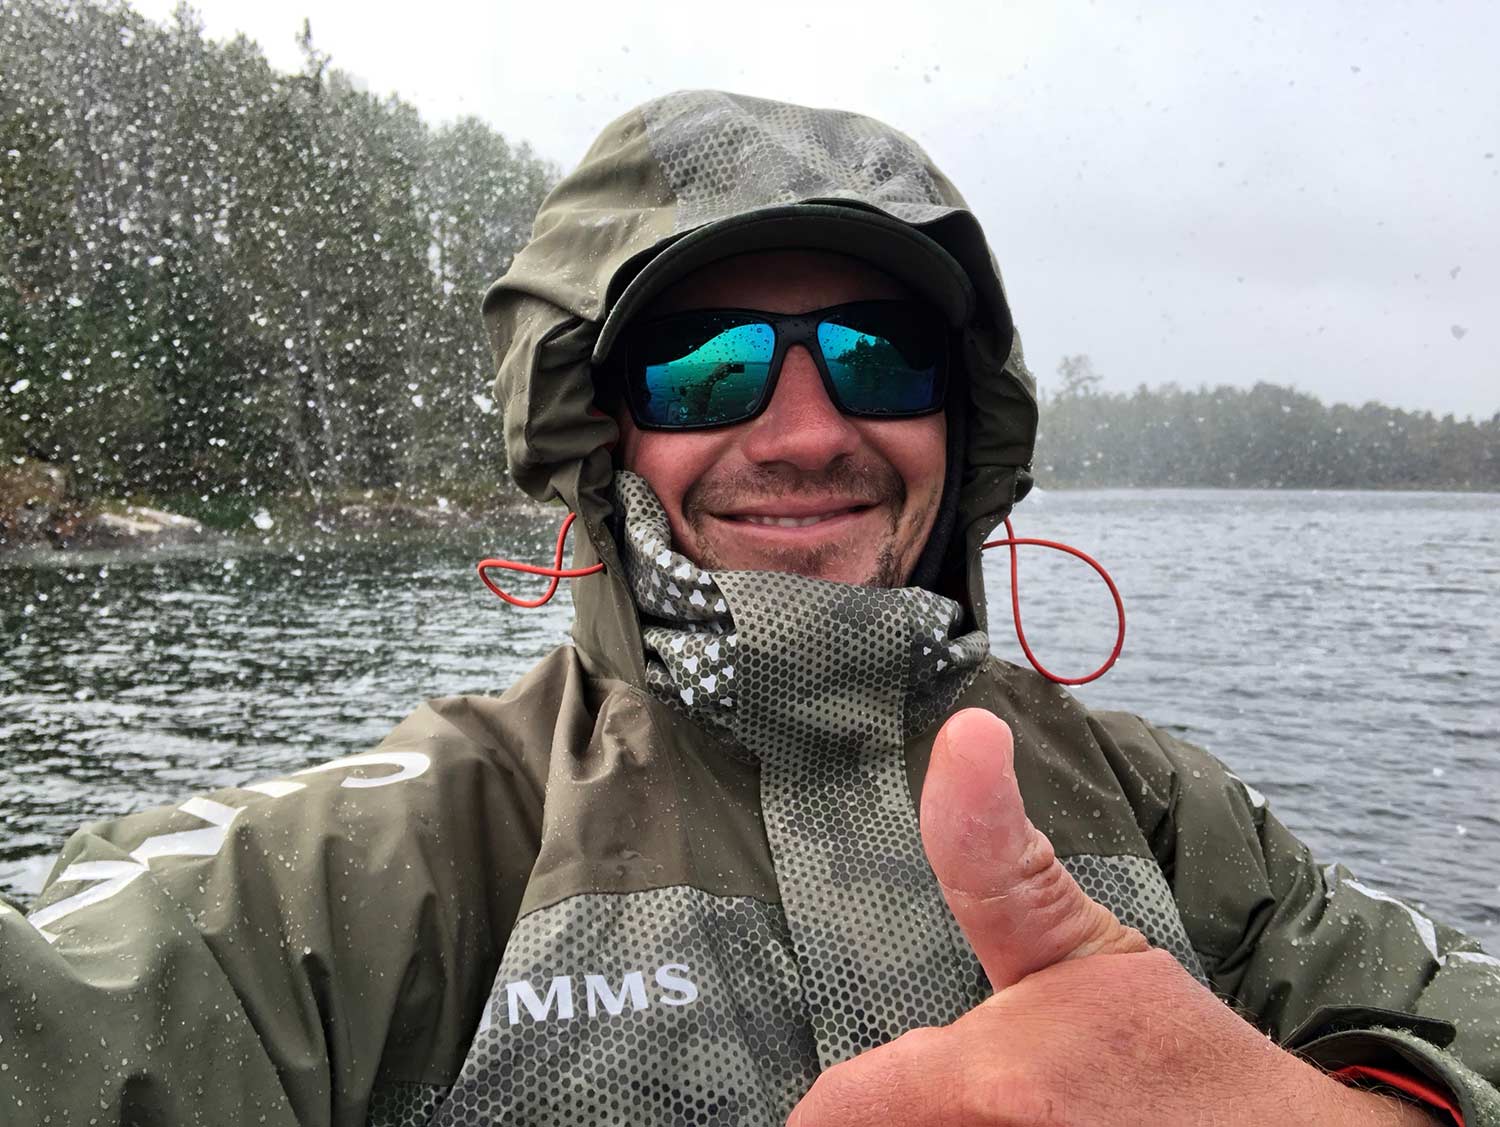 An angler smiles and thumbs up at the camera in the snow.